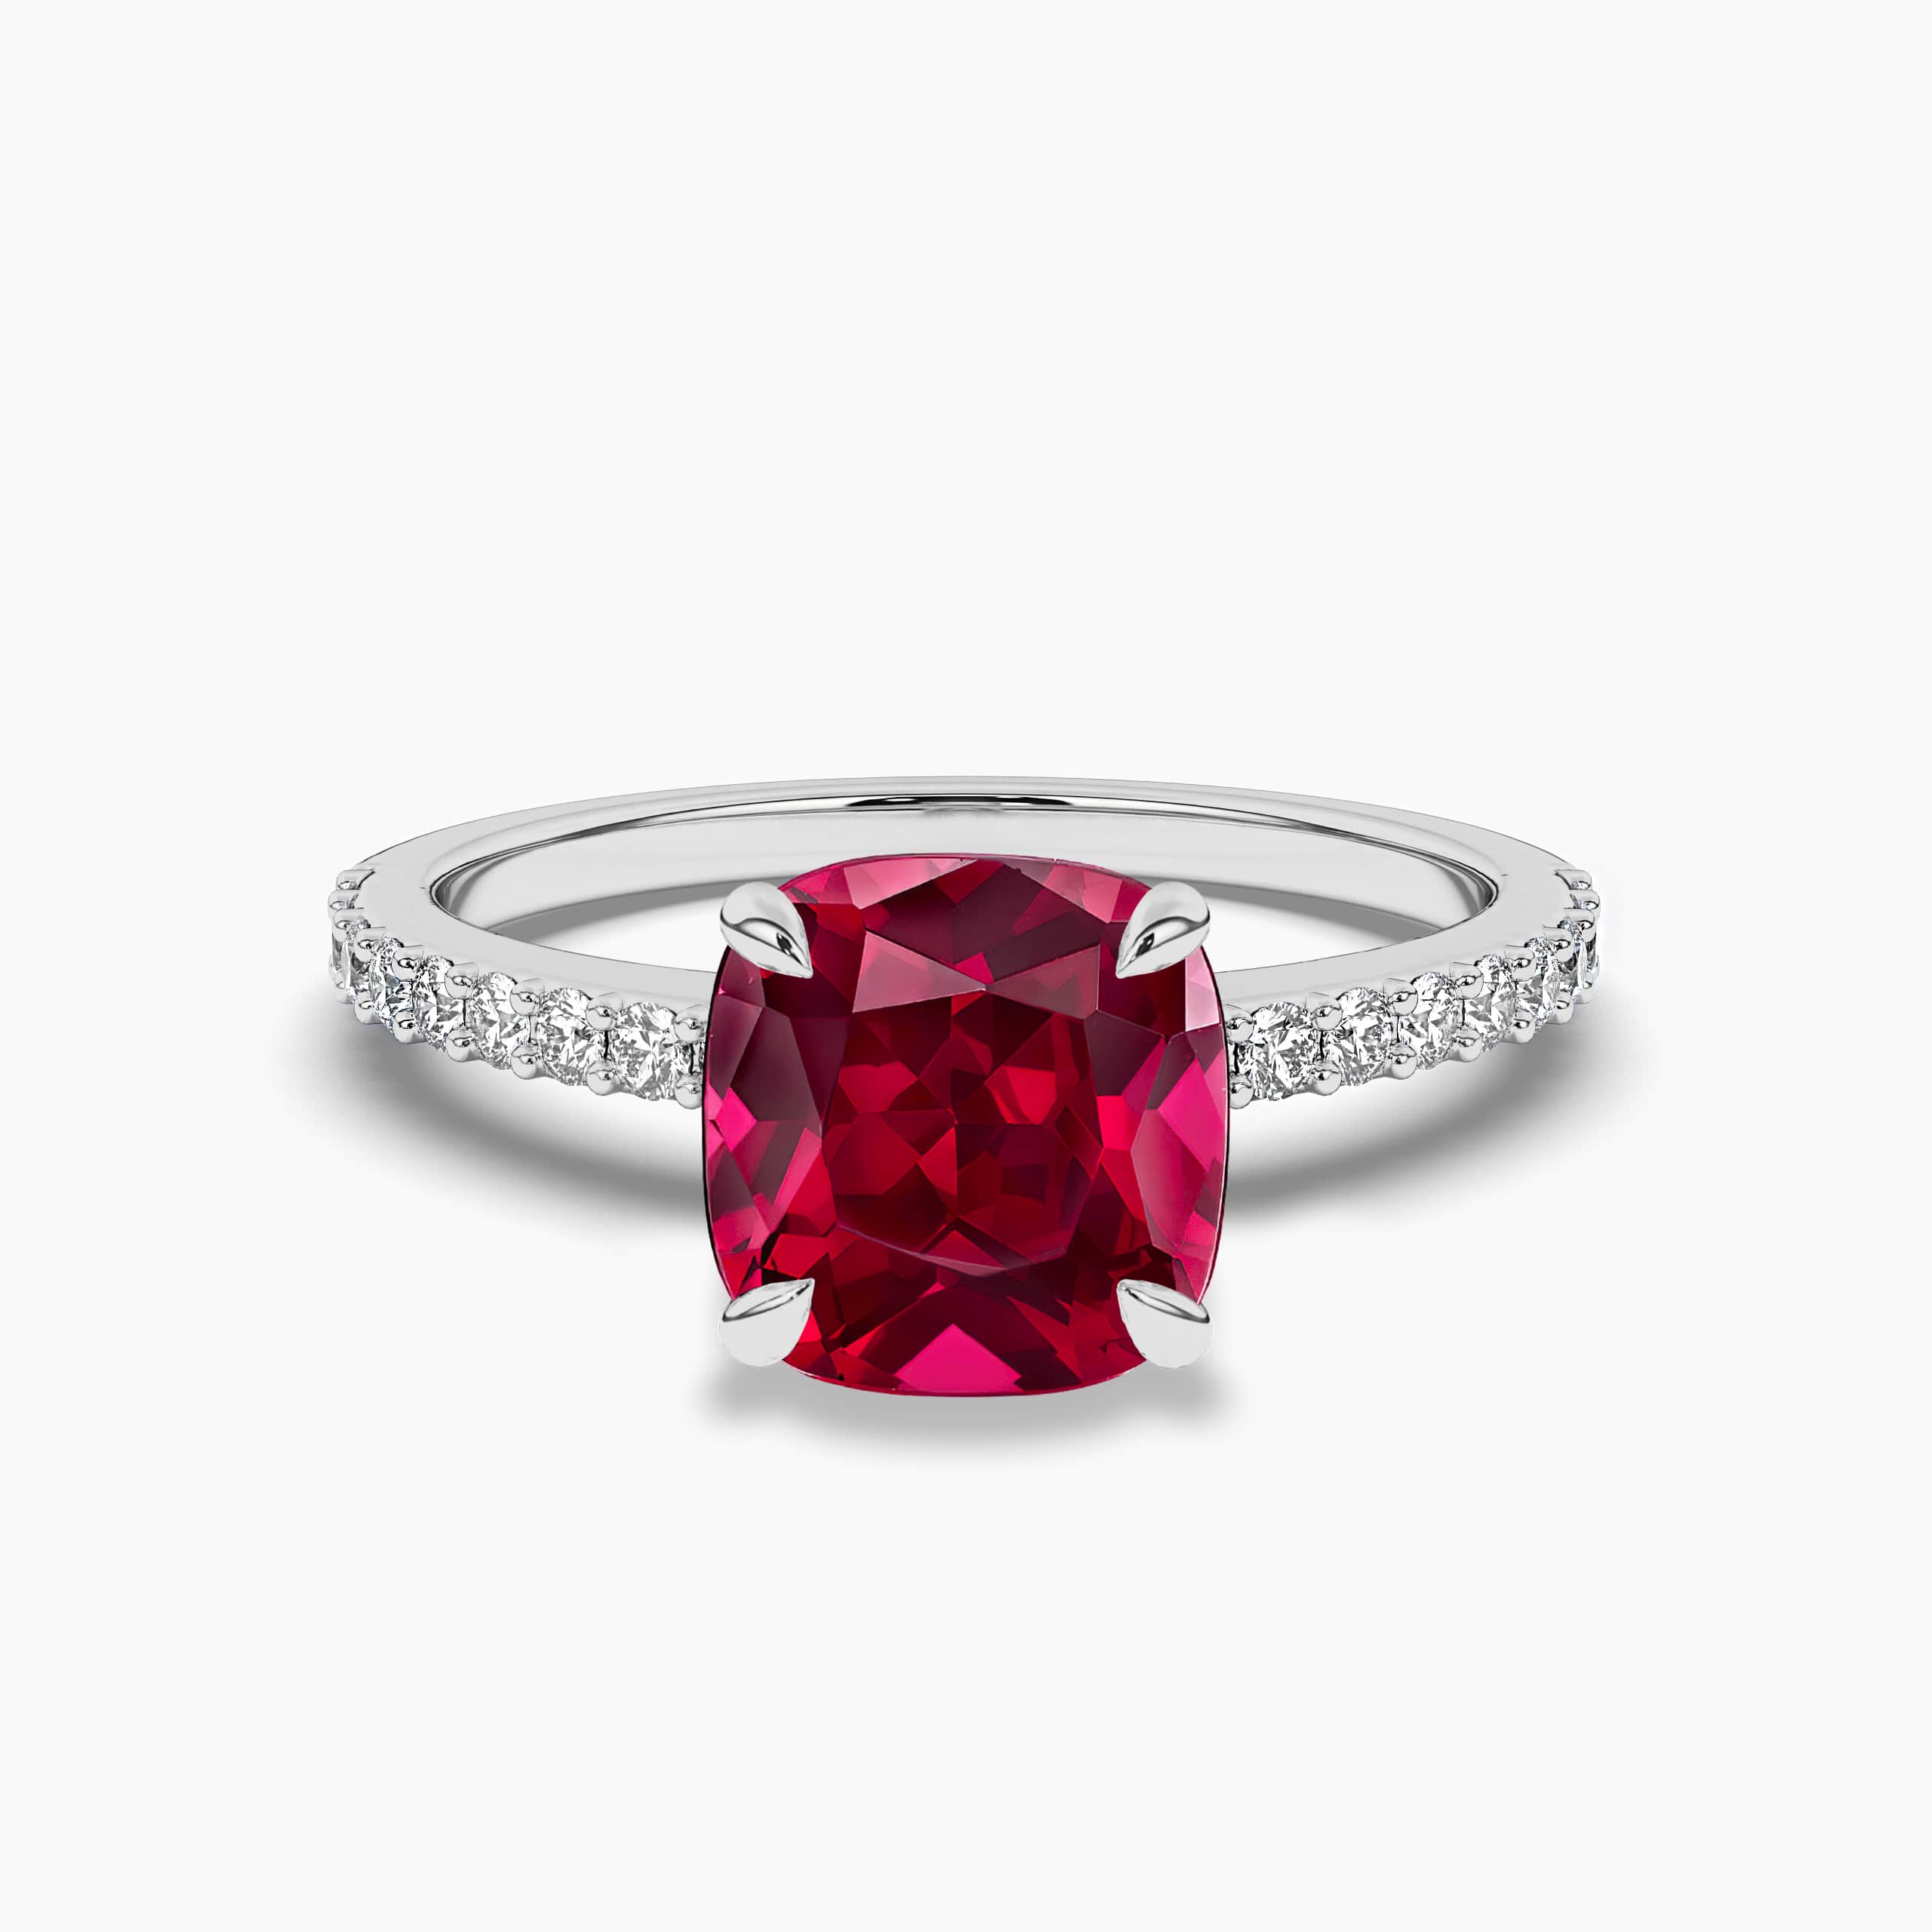 Cushion Cut Red Ruby Engagement Ring In White Gold 